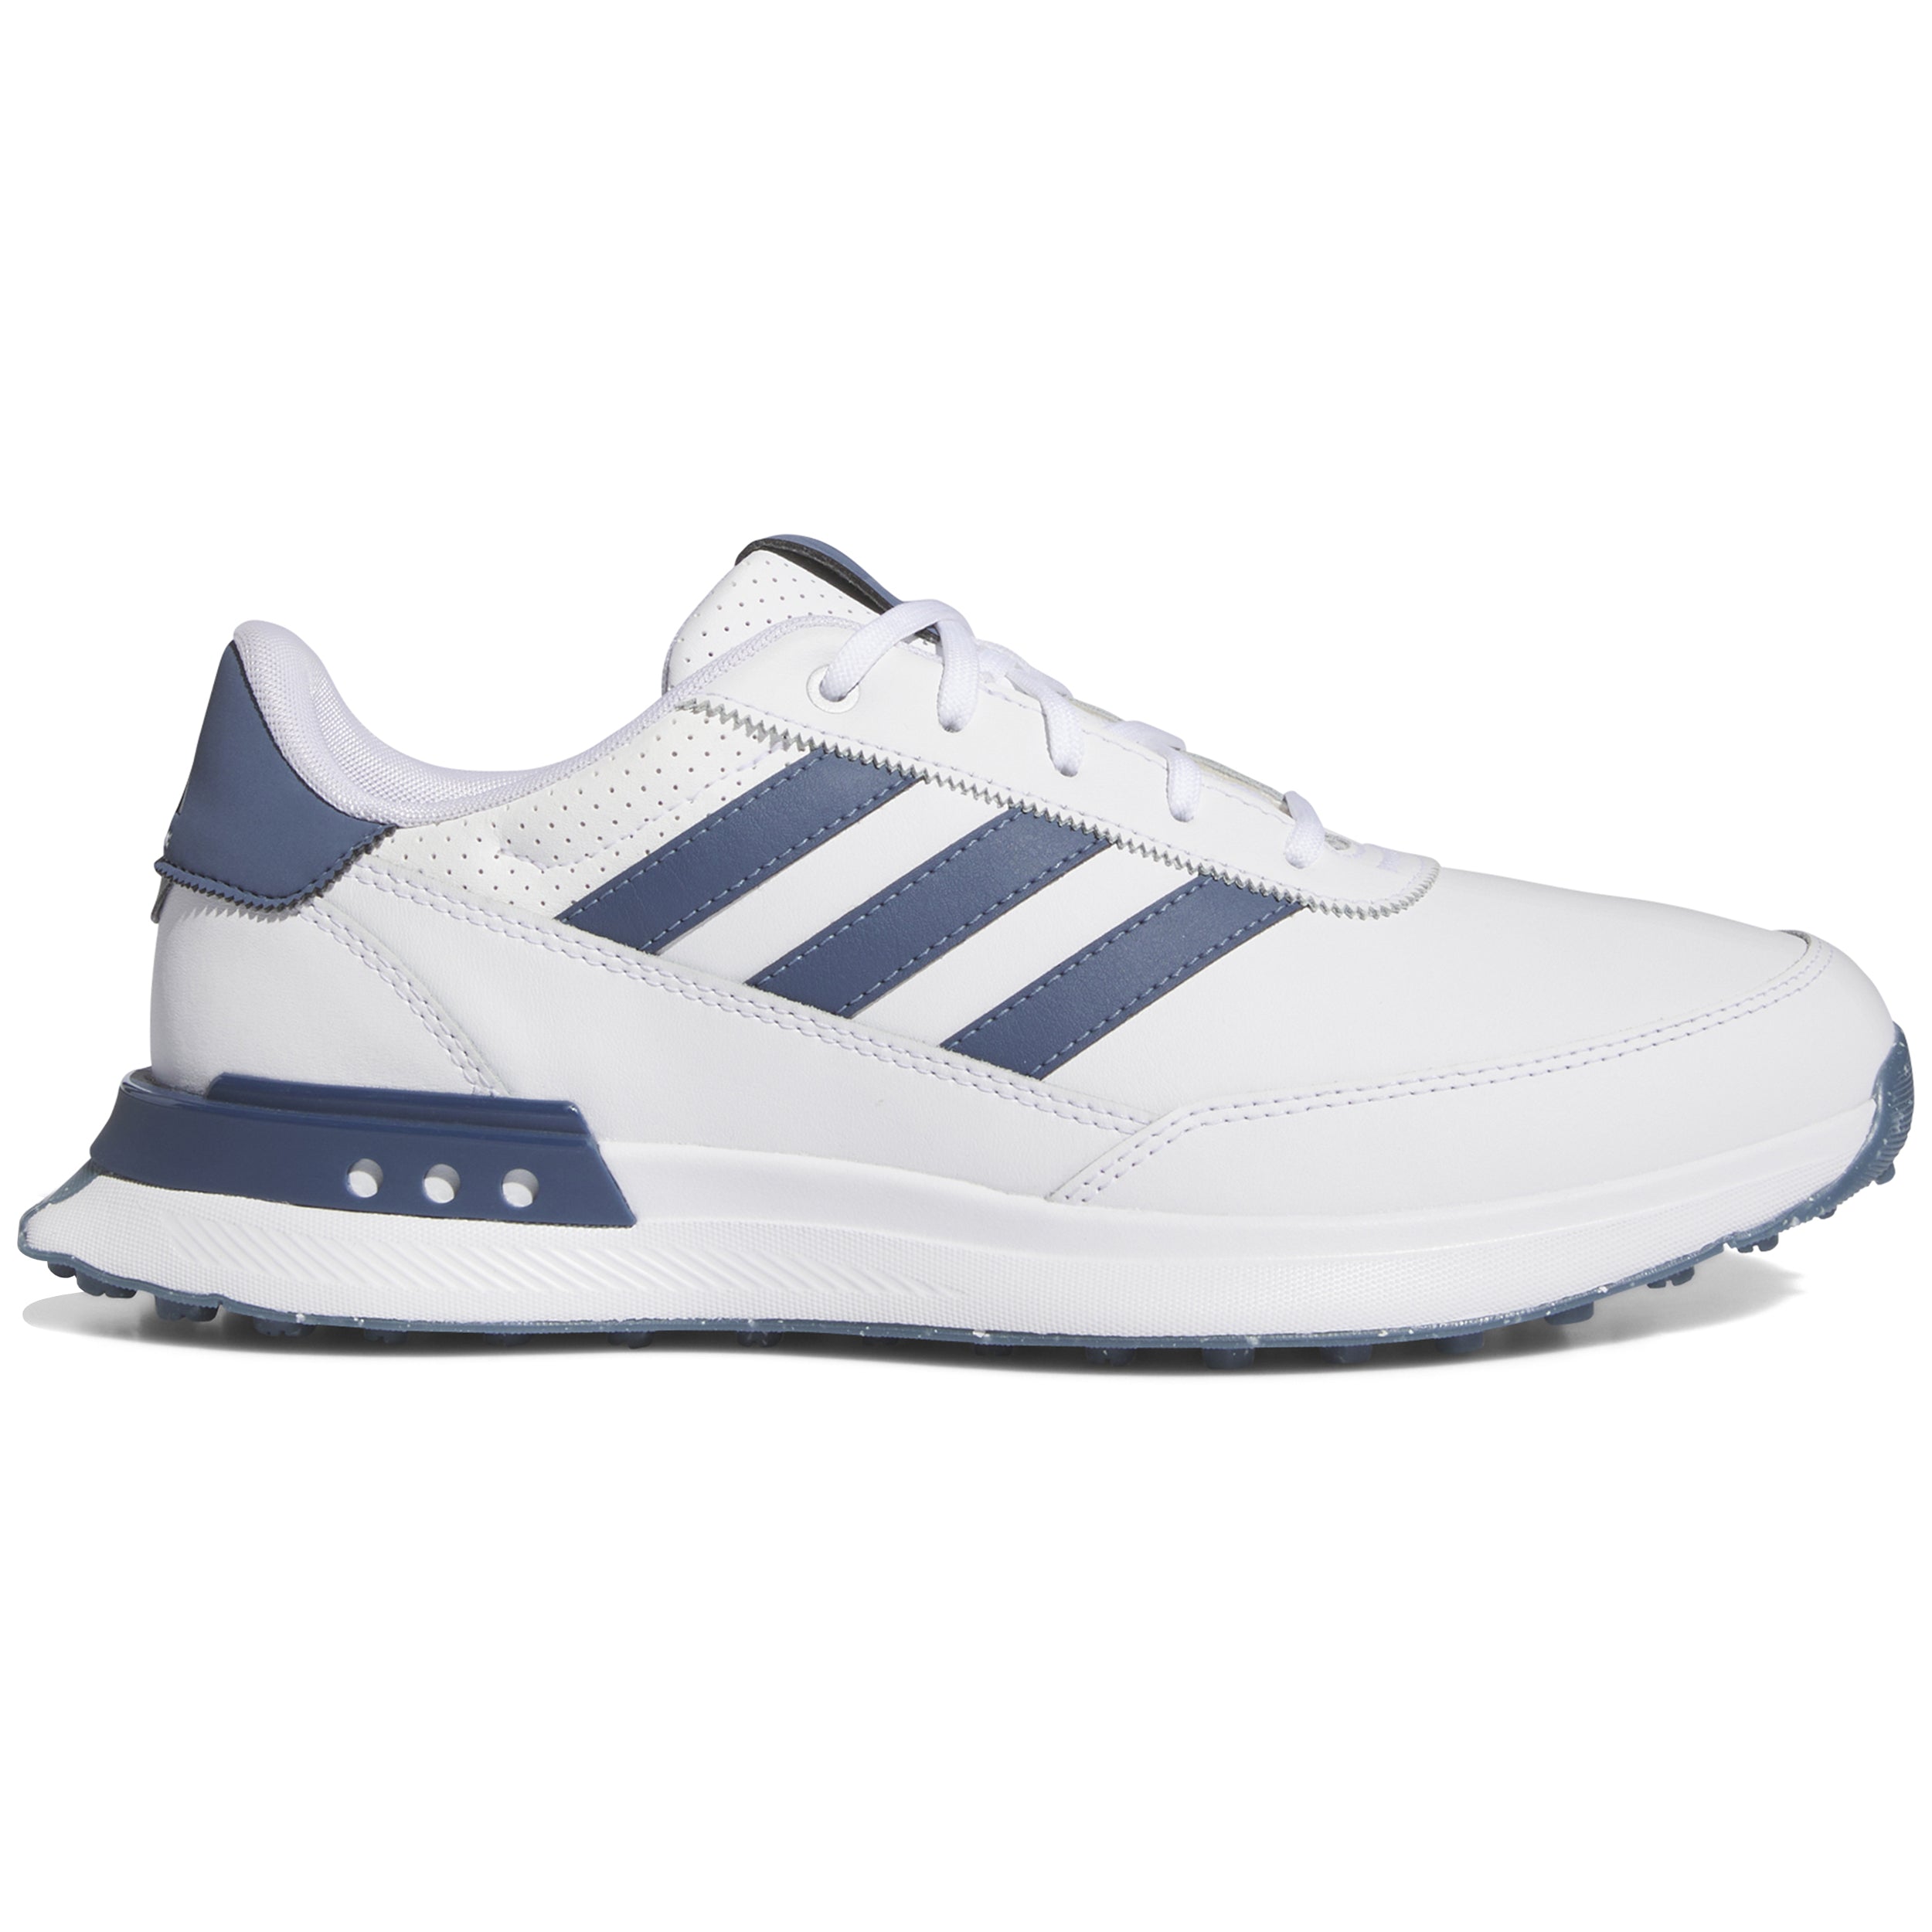 adidas S2G SL Leather 24 Golf Shoes IF6606 White Collegiate Navy Silver ...